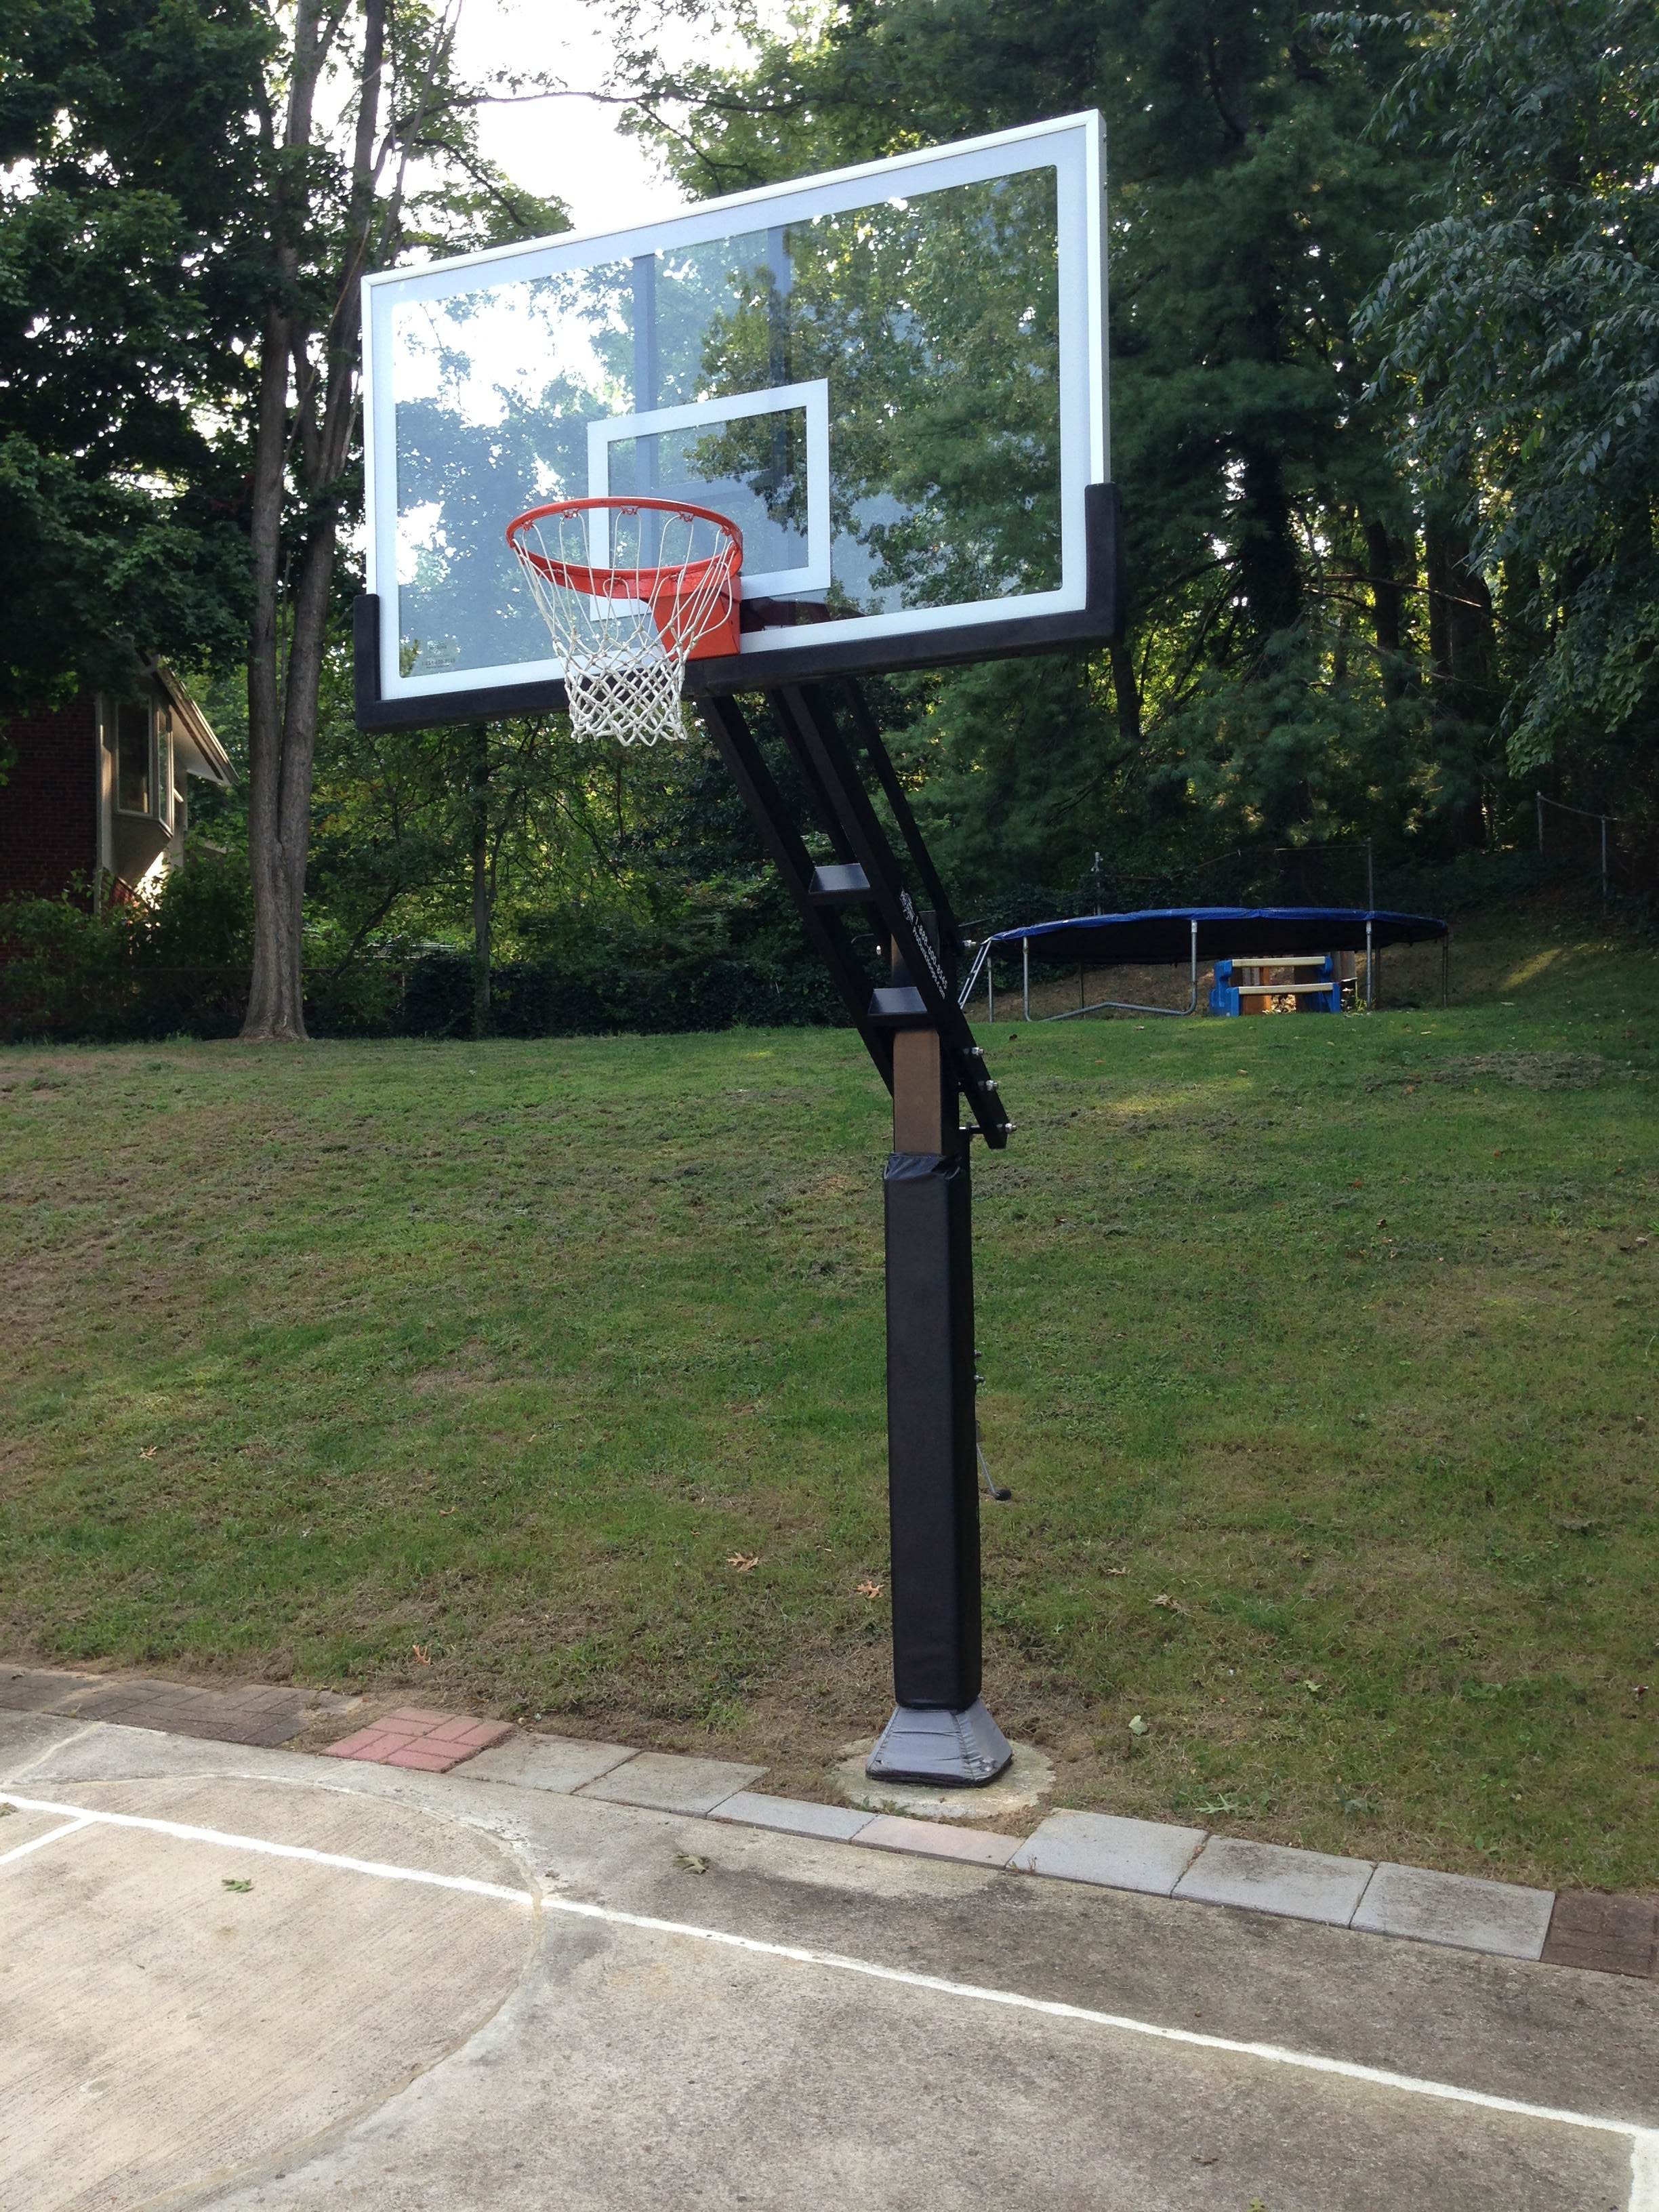 The hill behind the basketball system acts as a superb rebounder ensuring you never have to run after basketballs and the pavers are a genius way to extend the playing area at a low cost and effort.